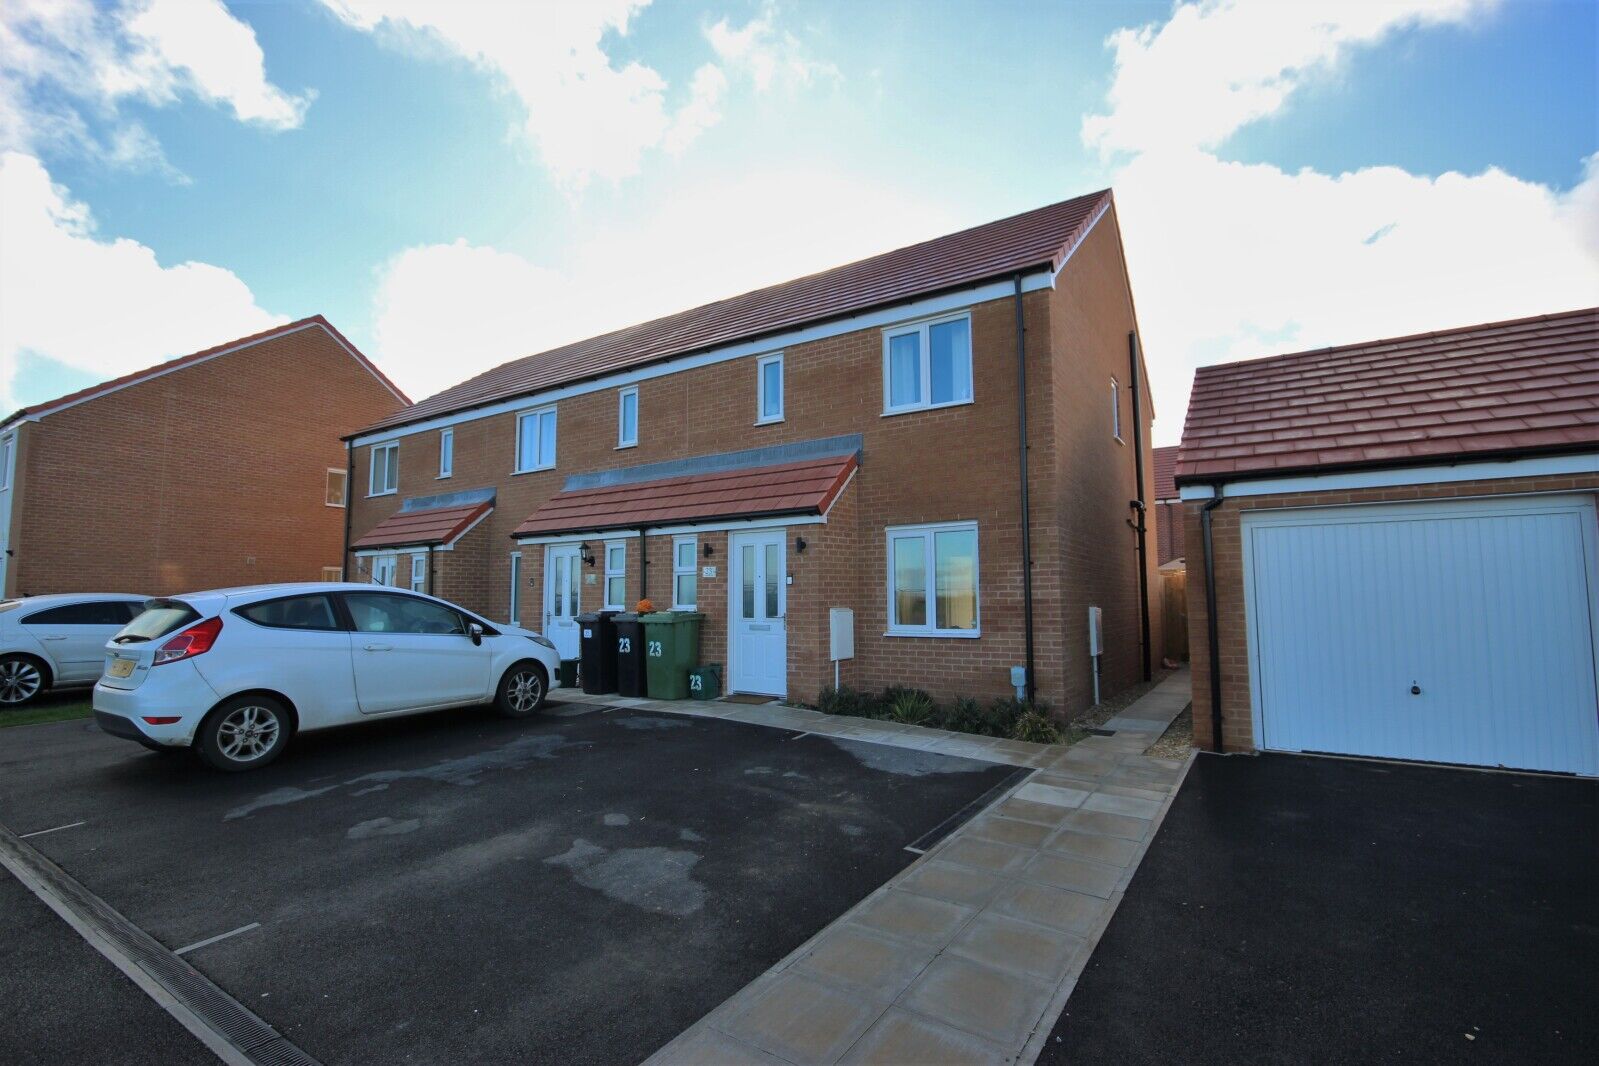 3 bedroom end terraced house for sale Bateman Place, Grove, OX12, main image